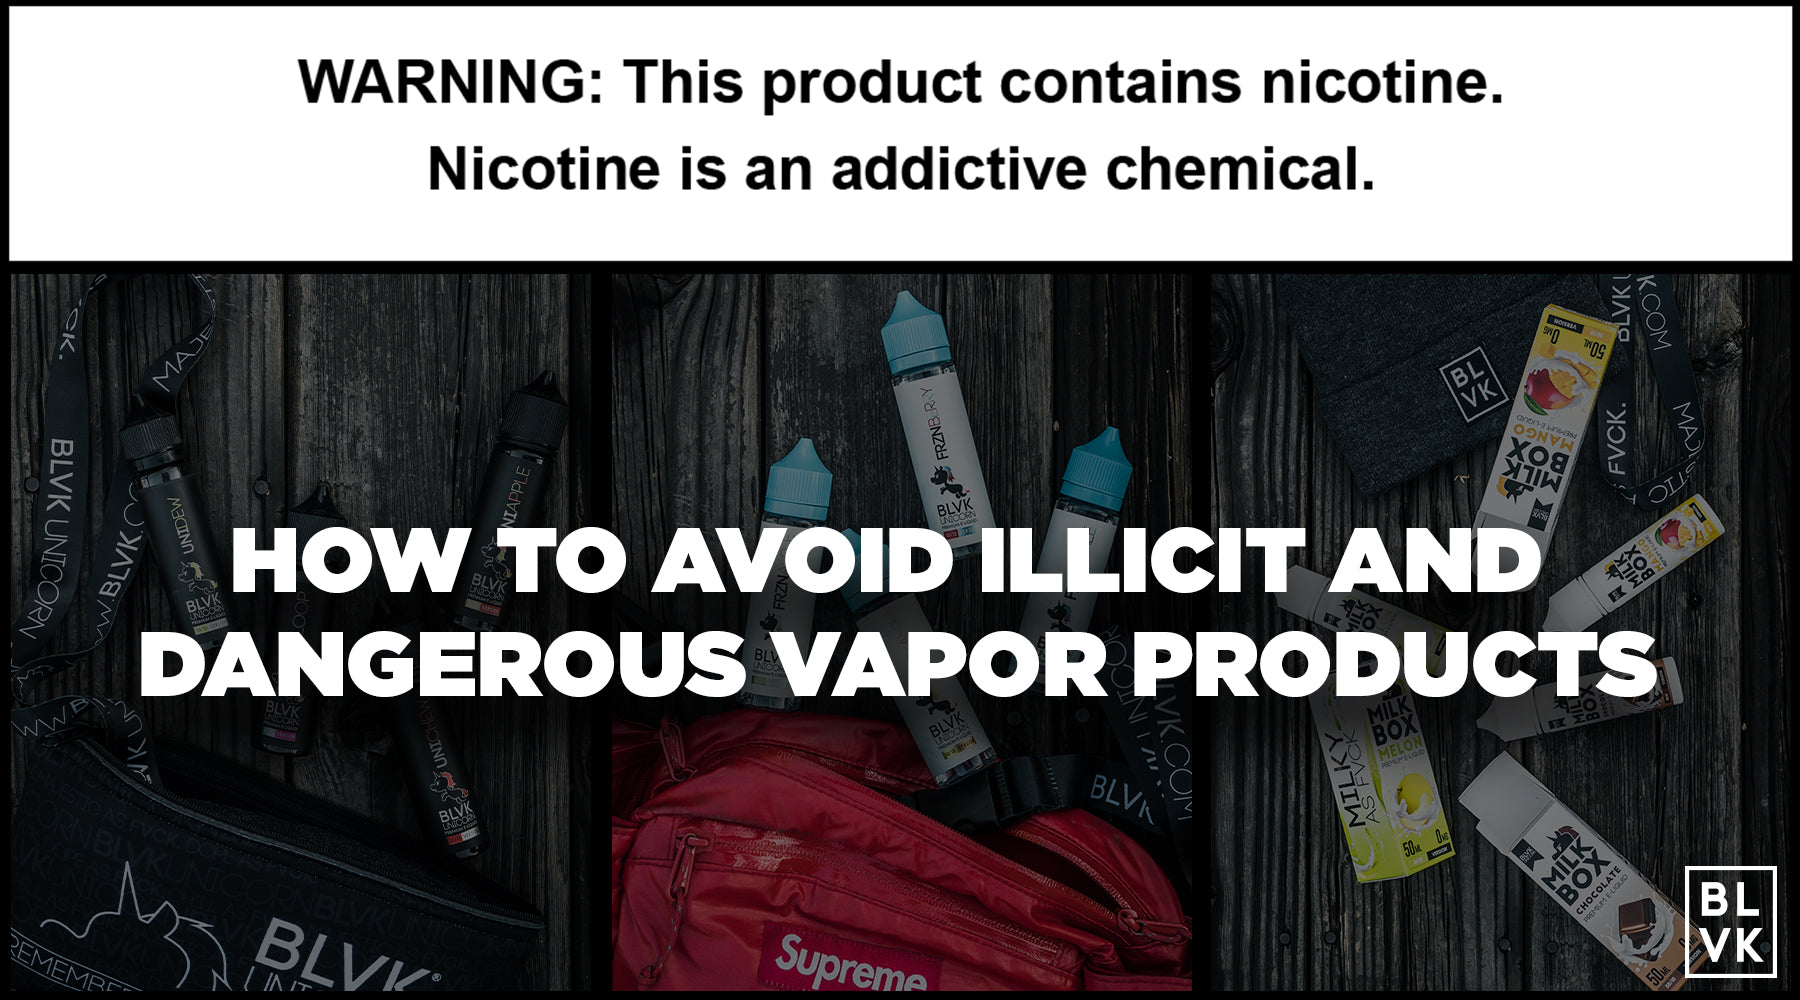 How to Avoid Illicit and Dangerous Vapor Products